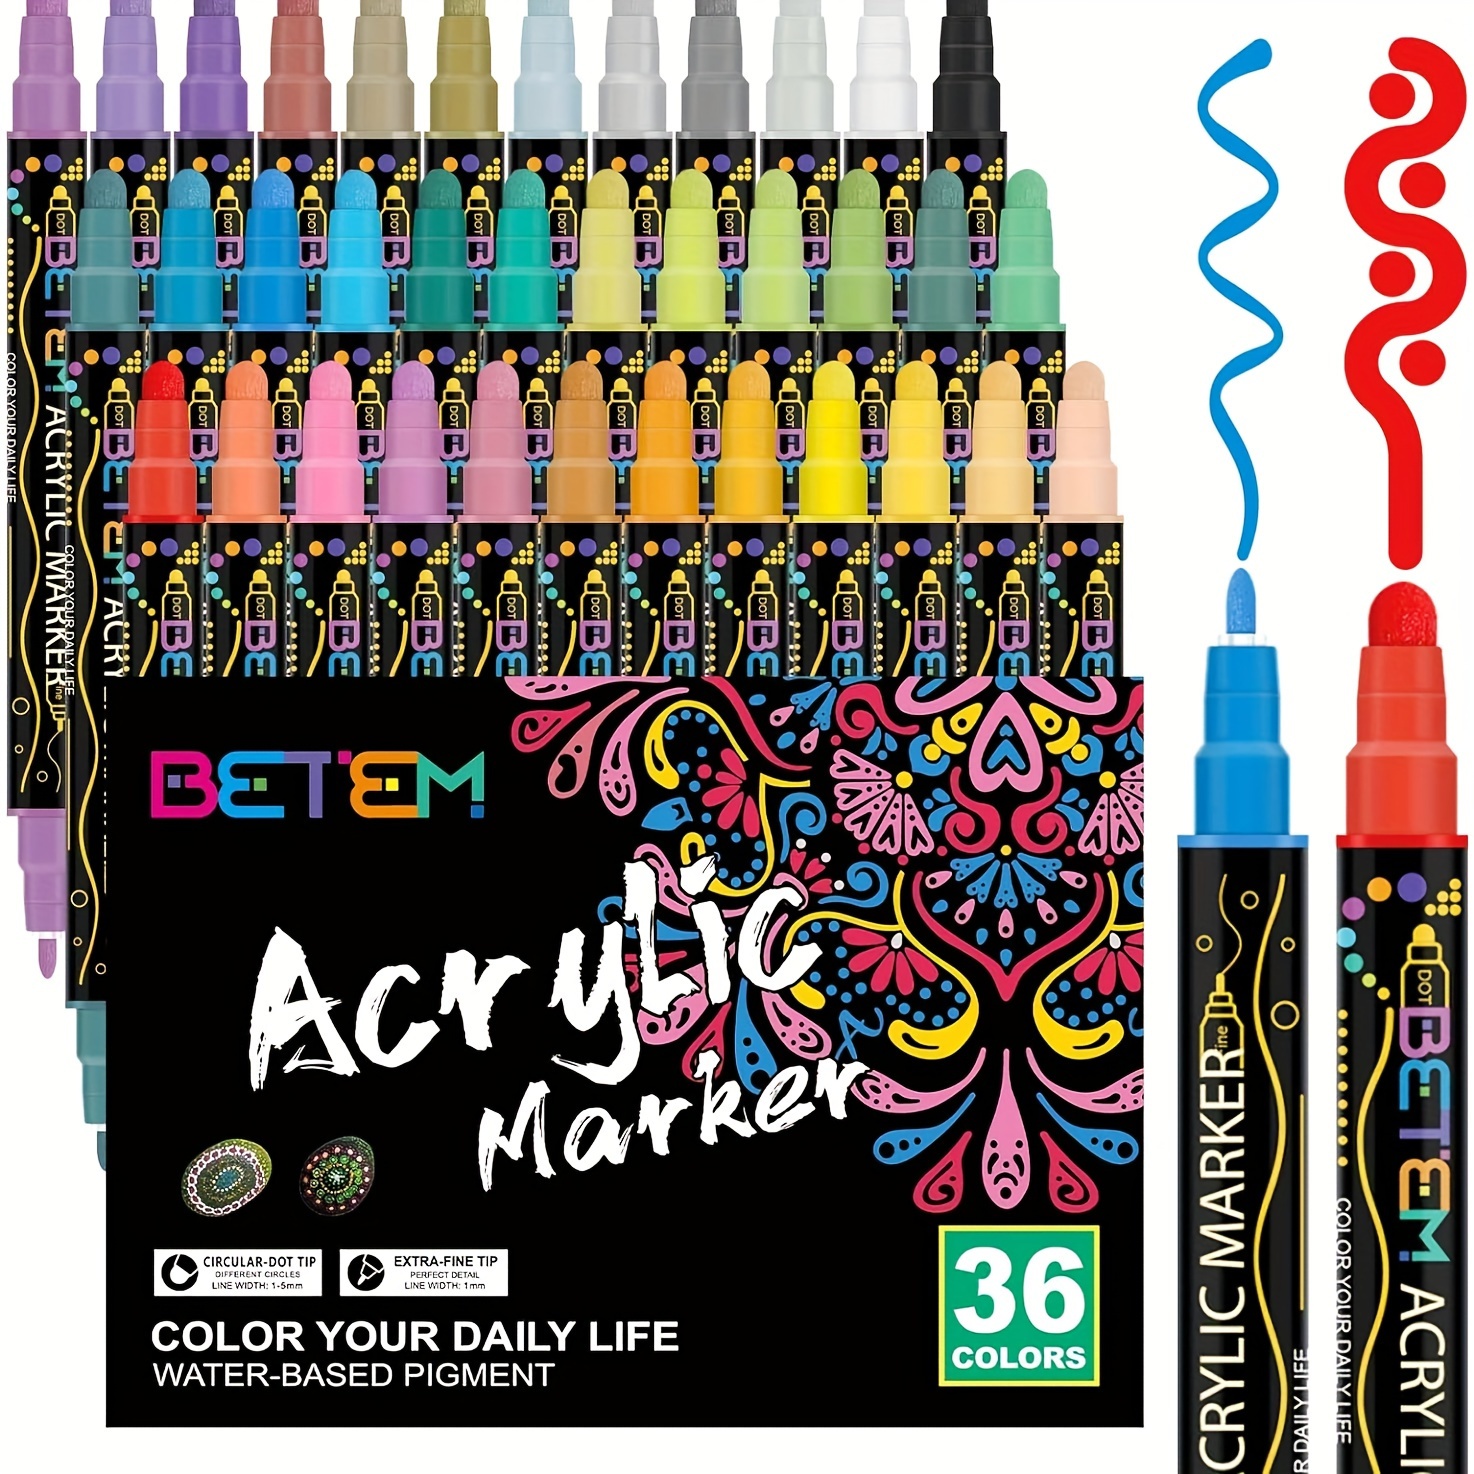 

24 36 48 60 Colors Dual Tip Acrylic Paint Pens Markers, Premium Acrylic Paint Pens For Wood, Canvas, Stone, Rock Painting, Glass, Ceramic Surfaces, Diy Crafts Making Art Supplies